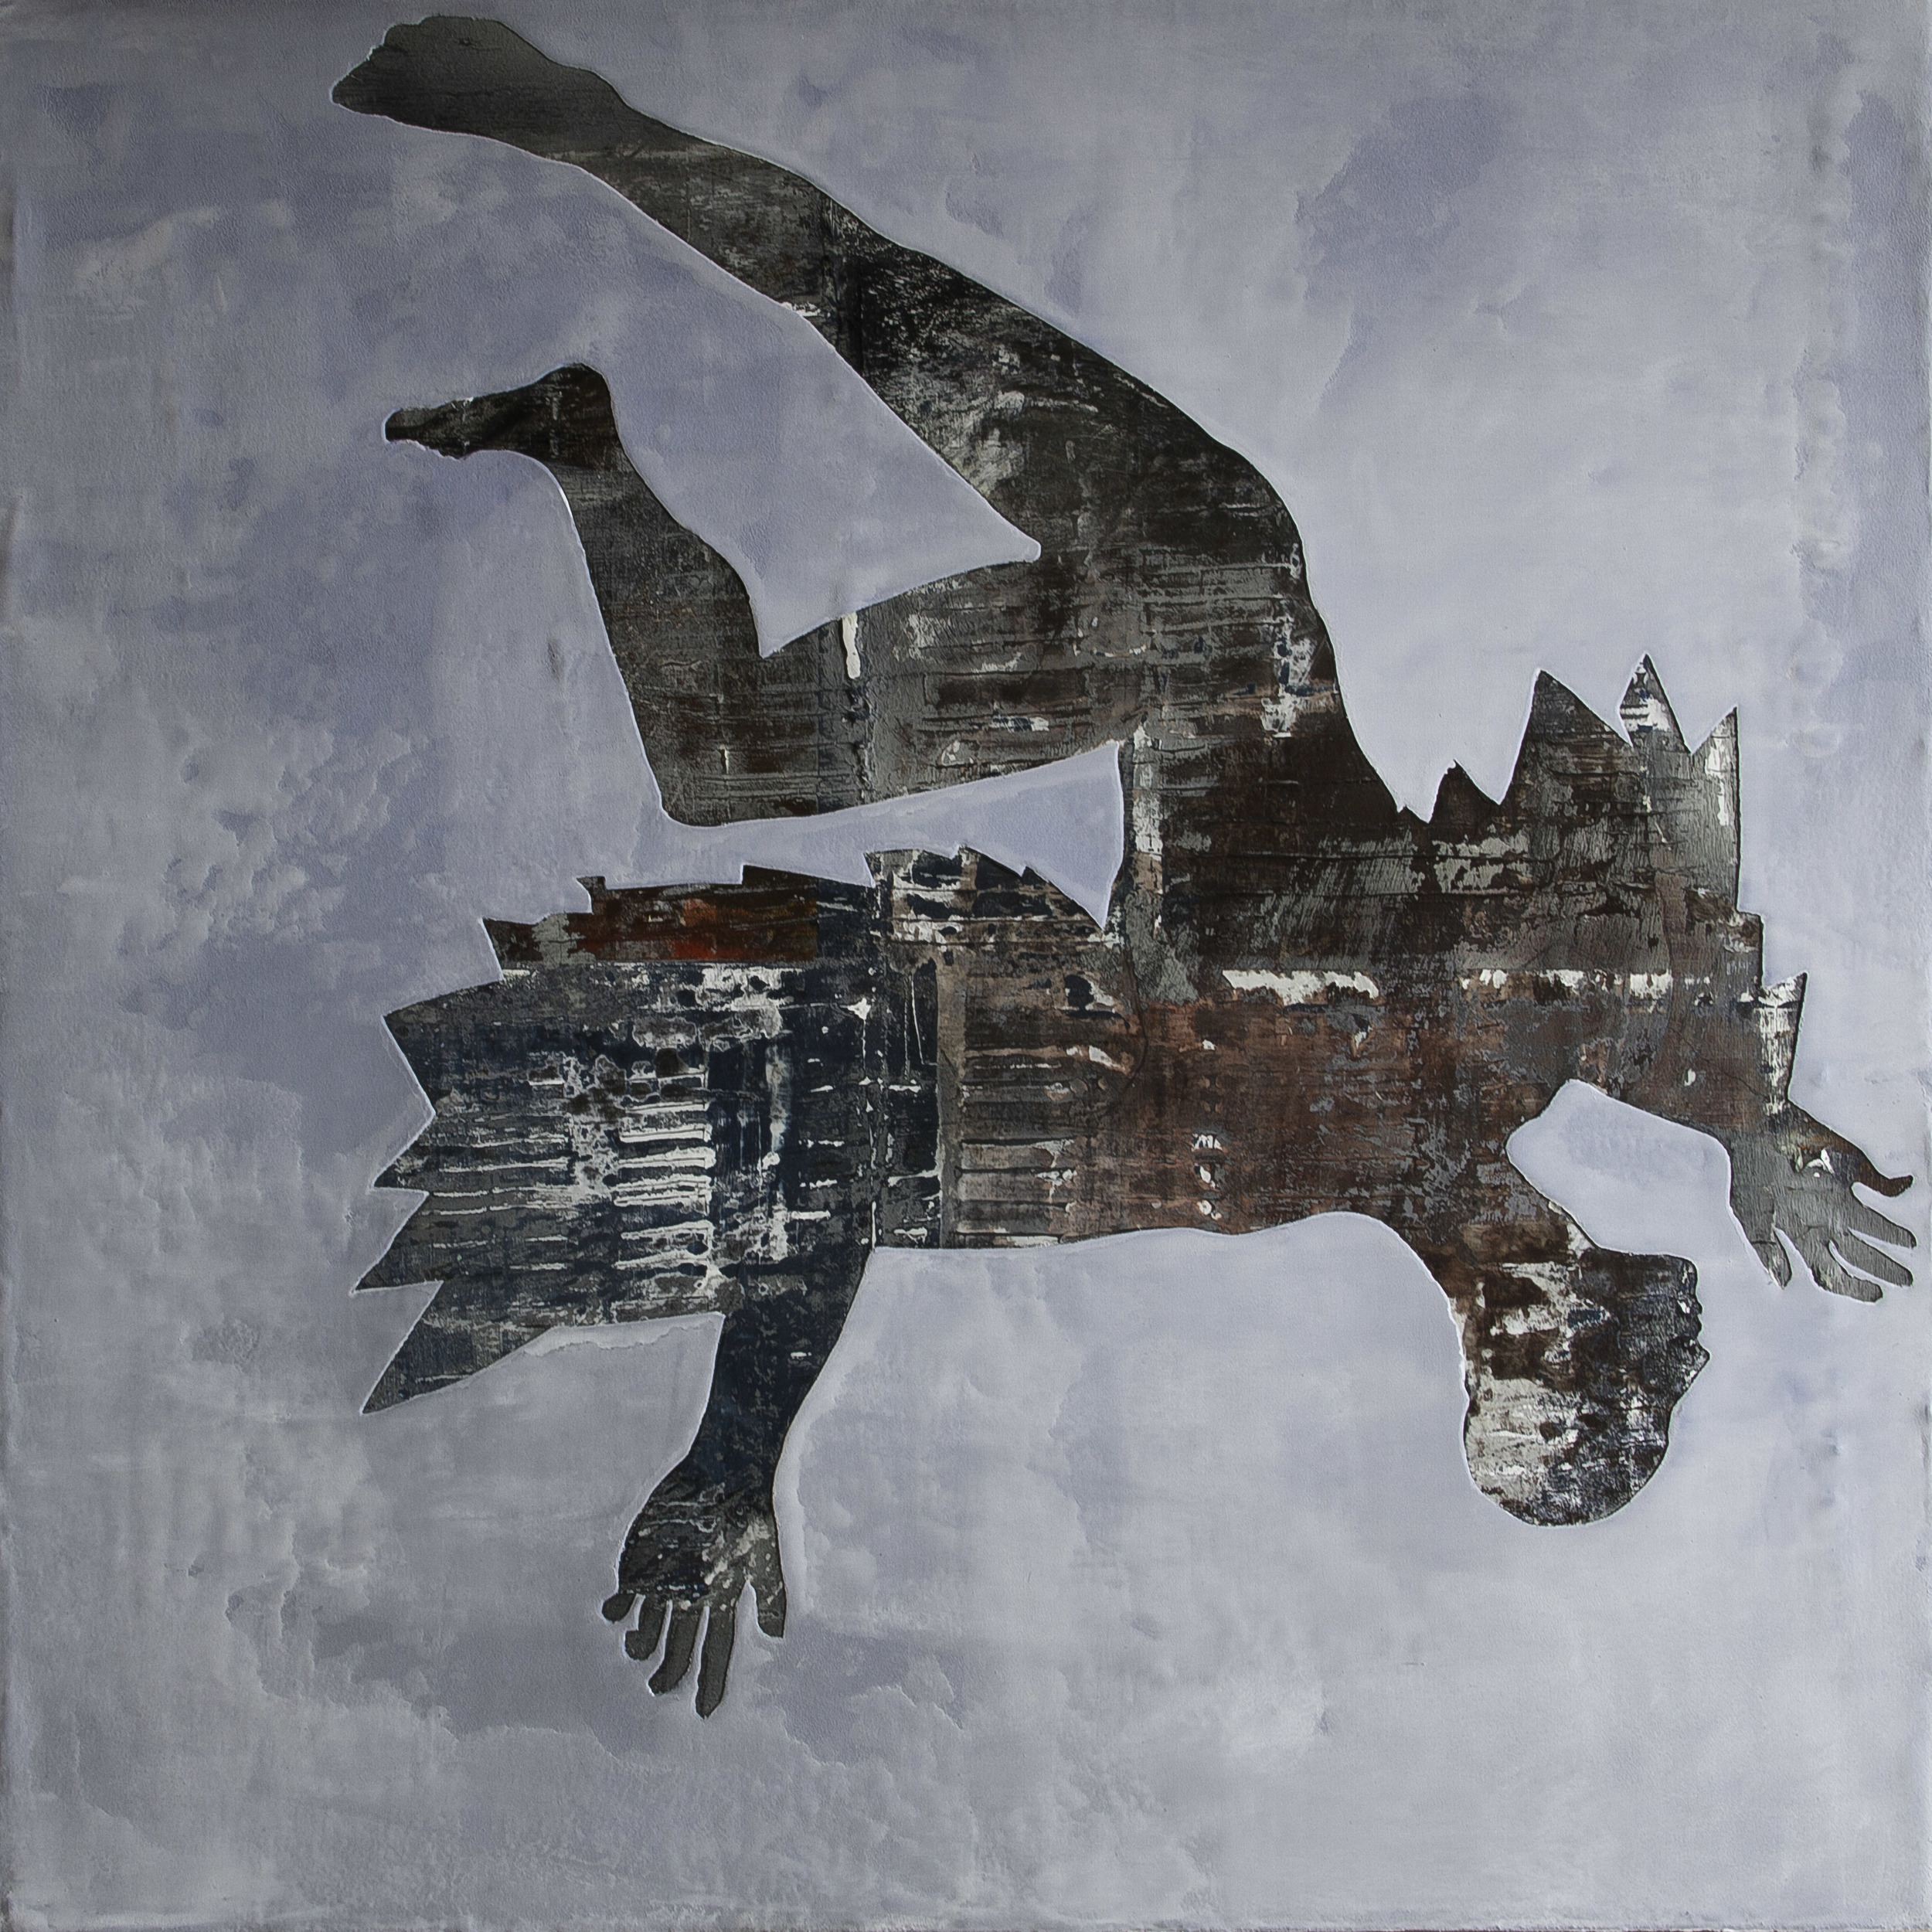  The Falling&nbsp; acrylic on canvas 36 x 36 inches 2014  unavailable 